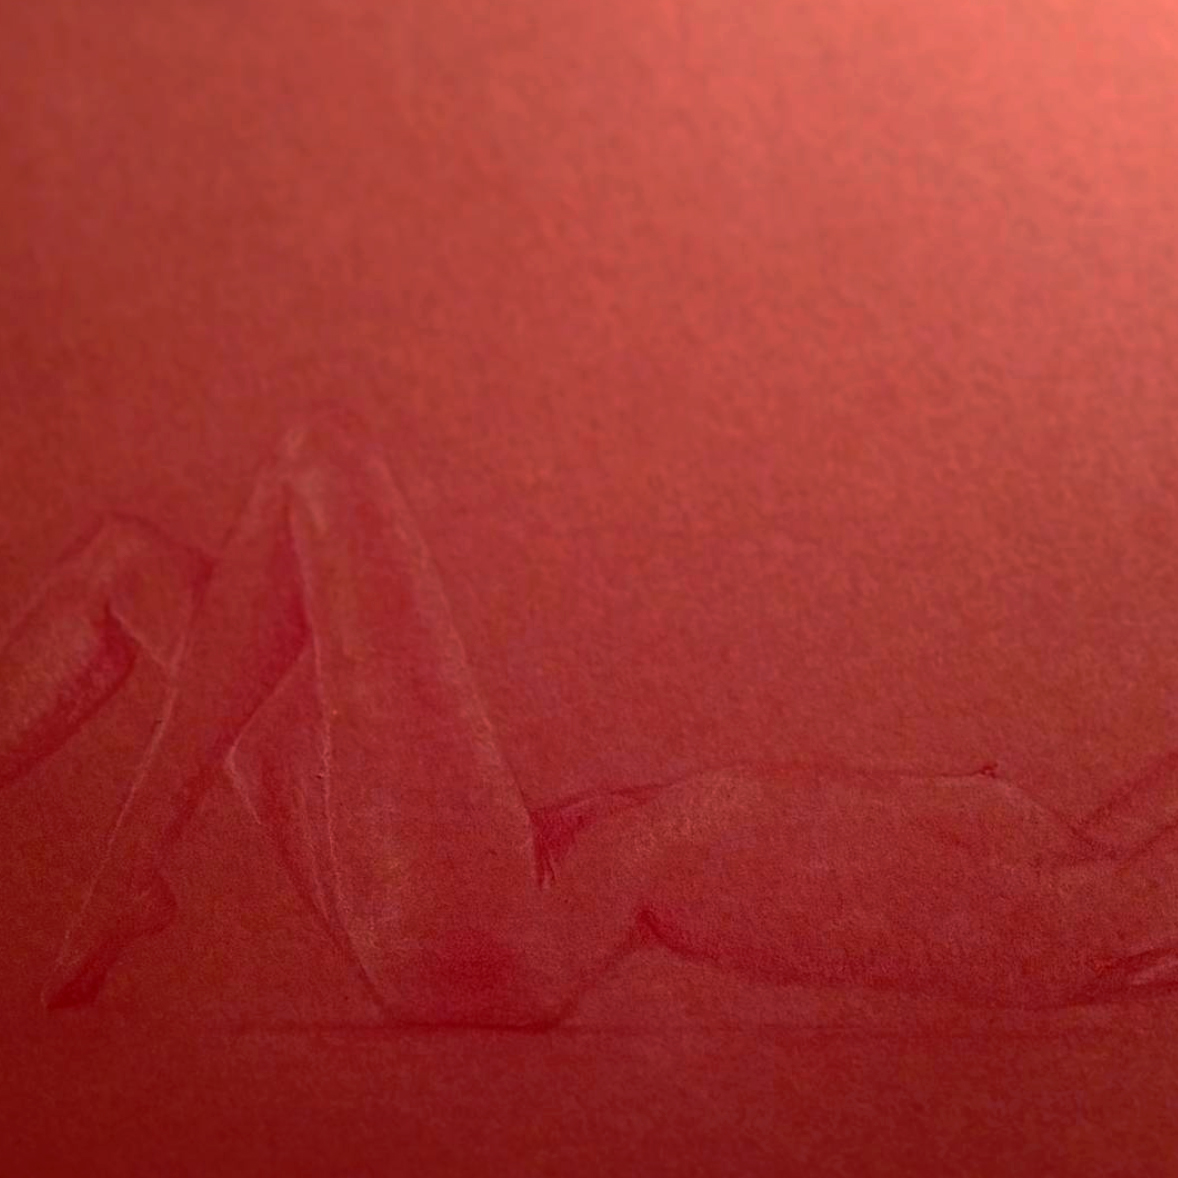 A drawing of a nude woman laying on her back, cropped to show only her body. The drawing is red colored pencil on red paper.